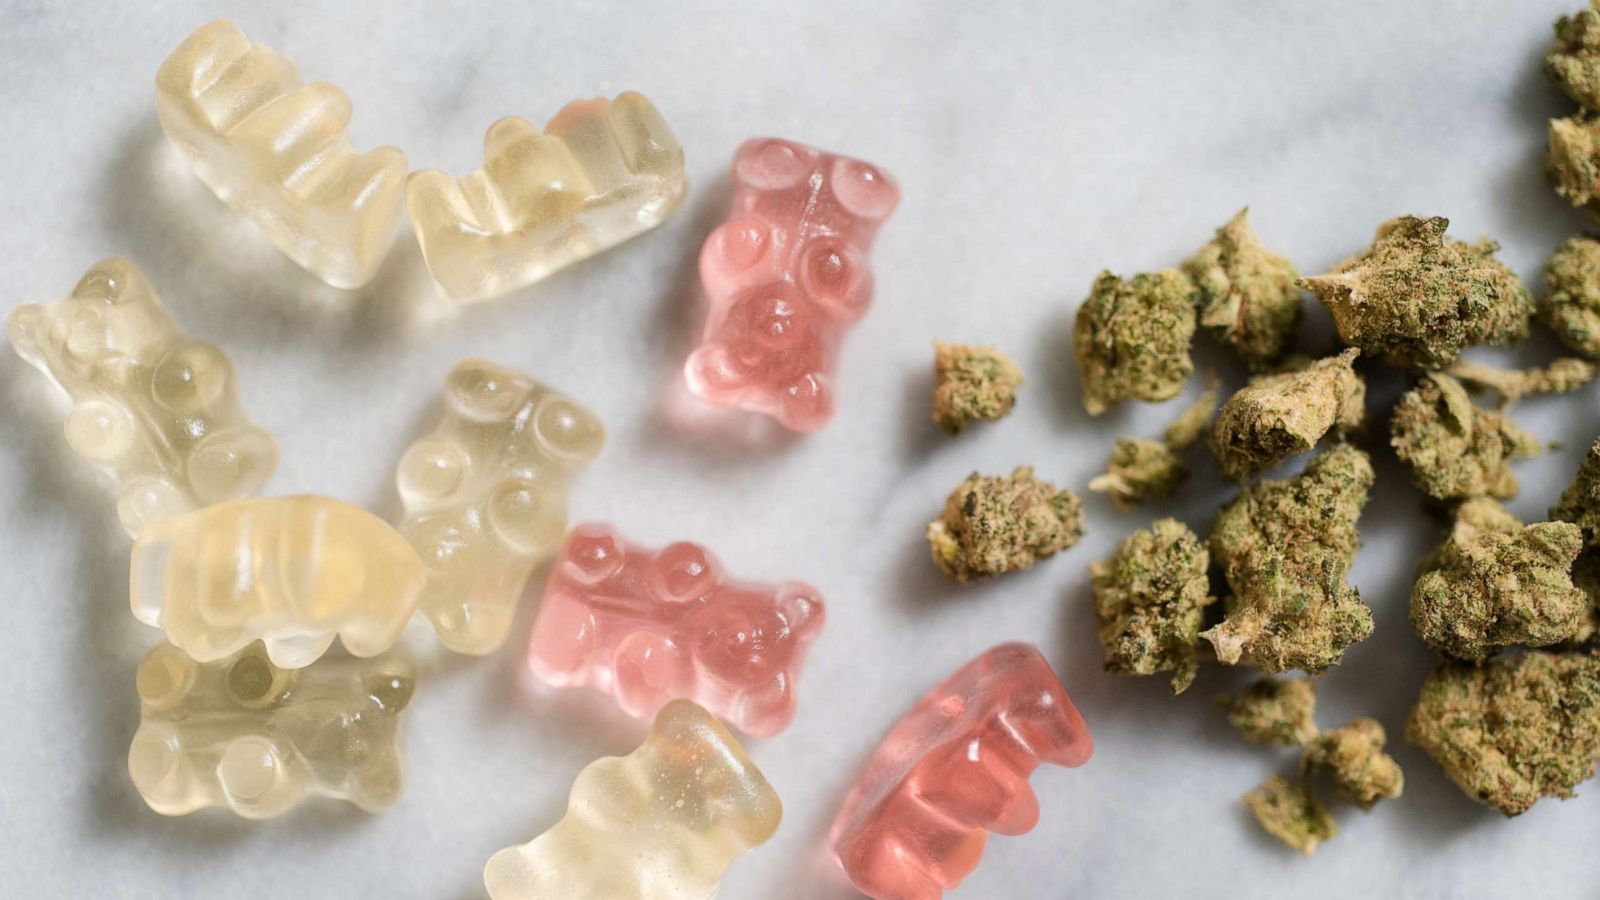 Marijuana Edibles Might Not Be As Safe As Thought Health Experts